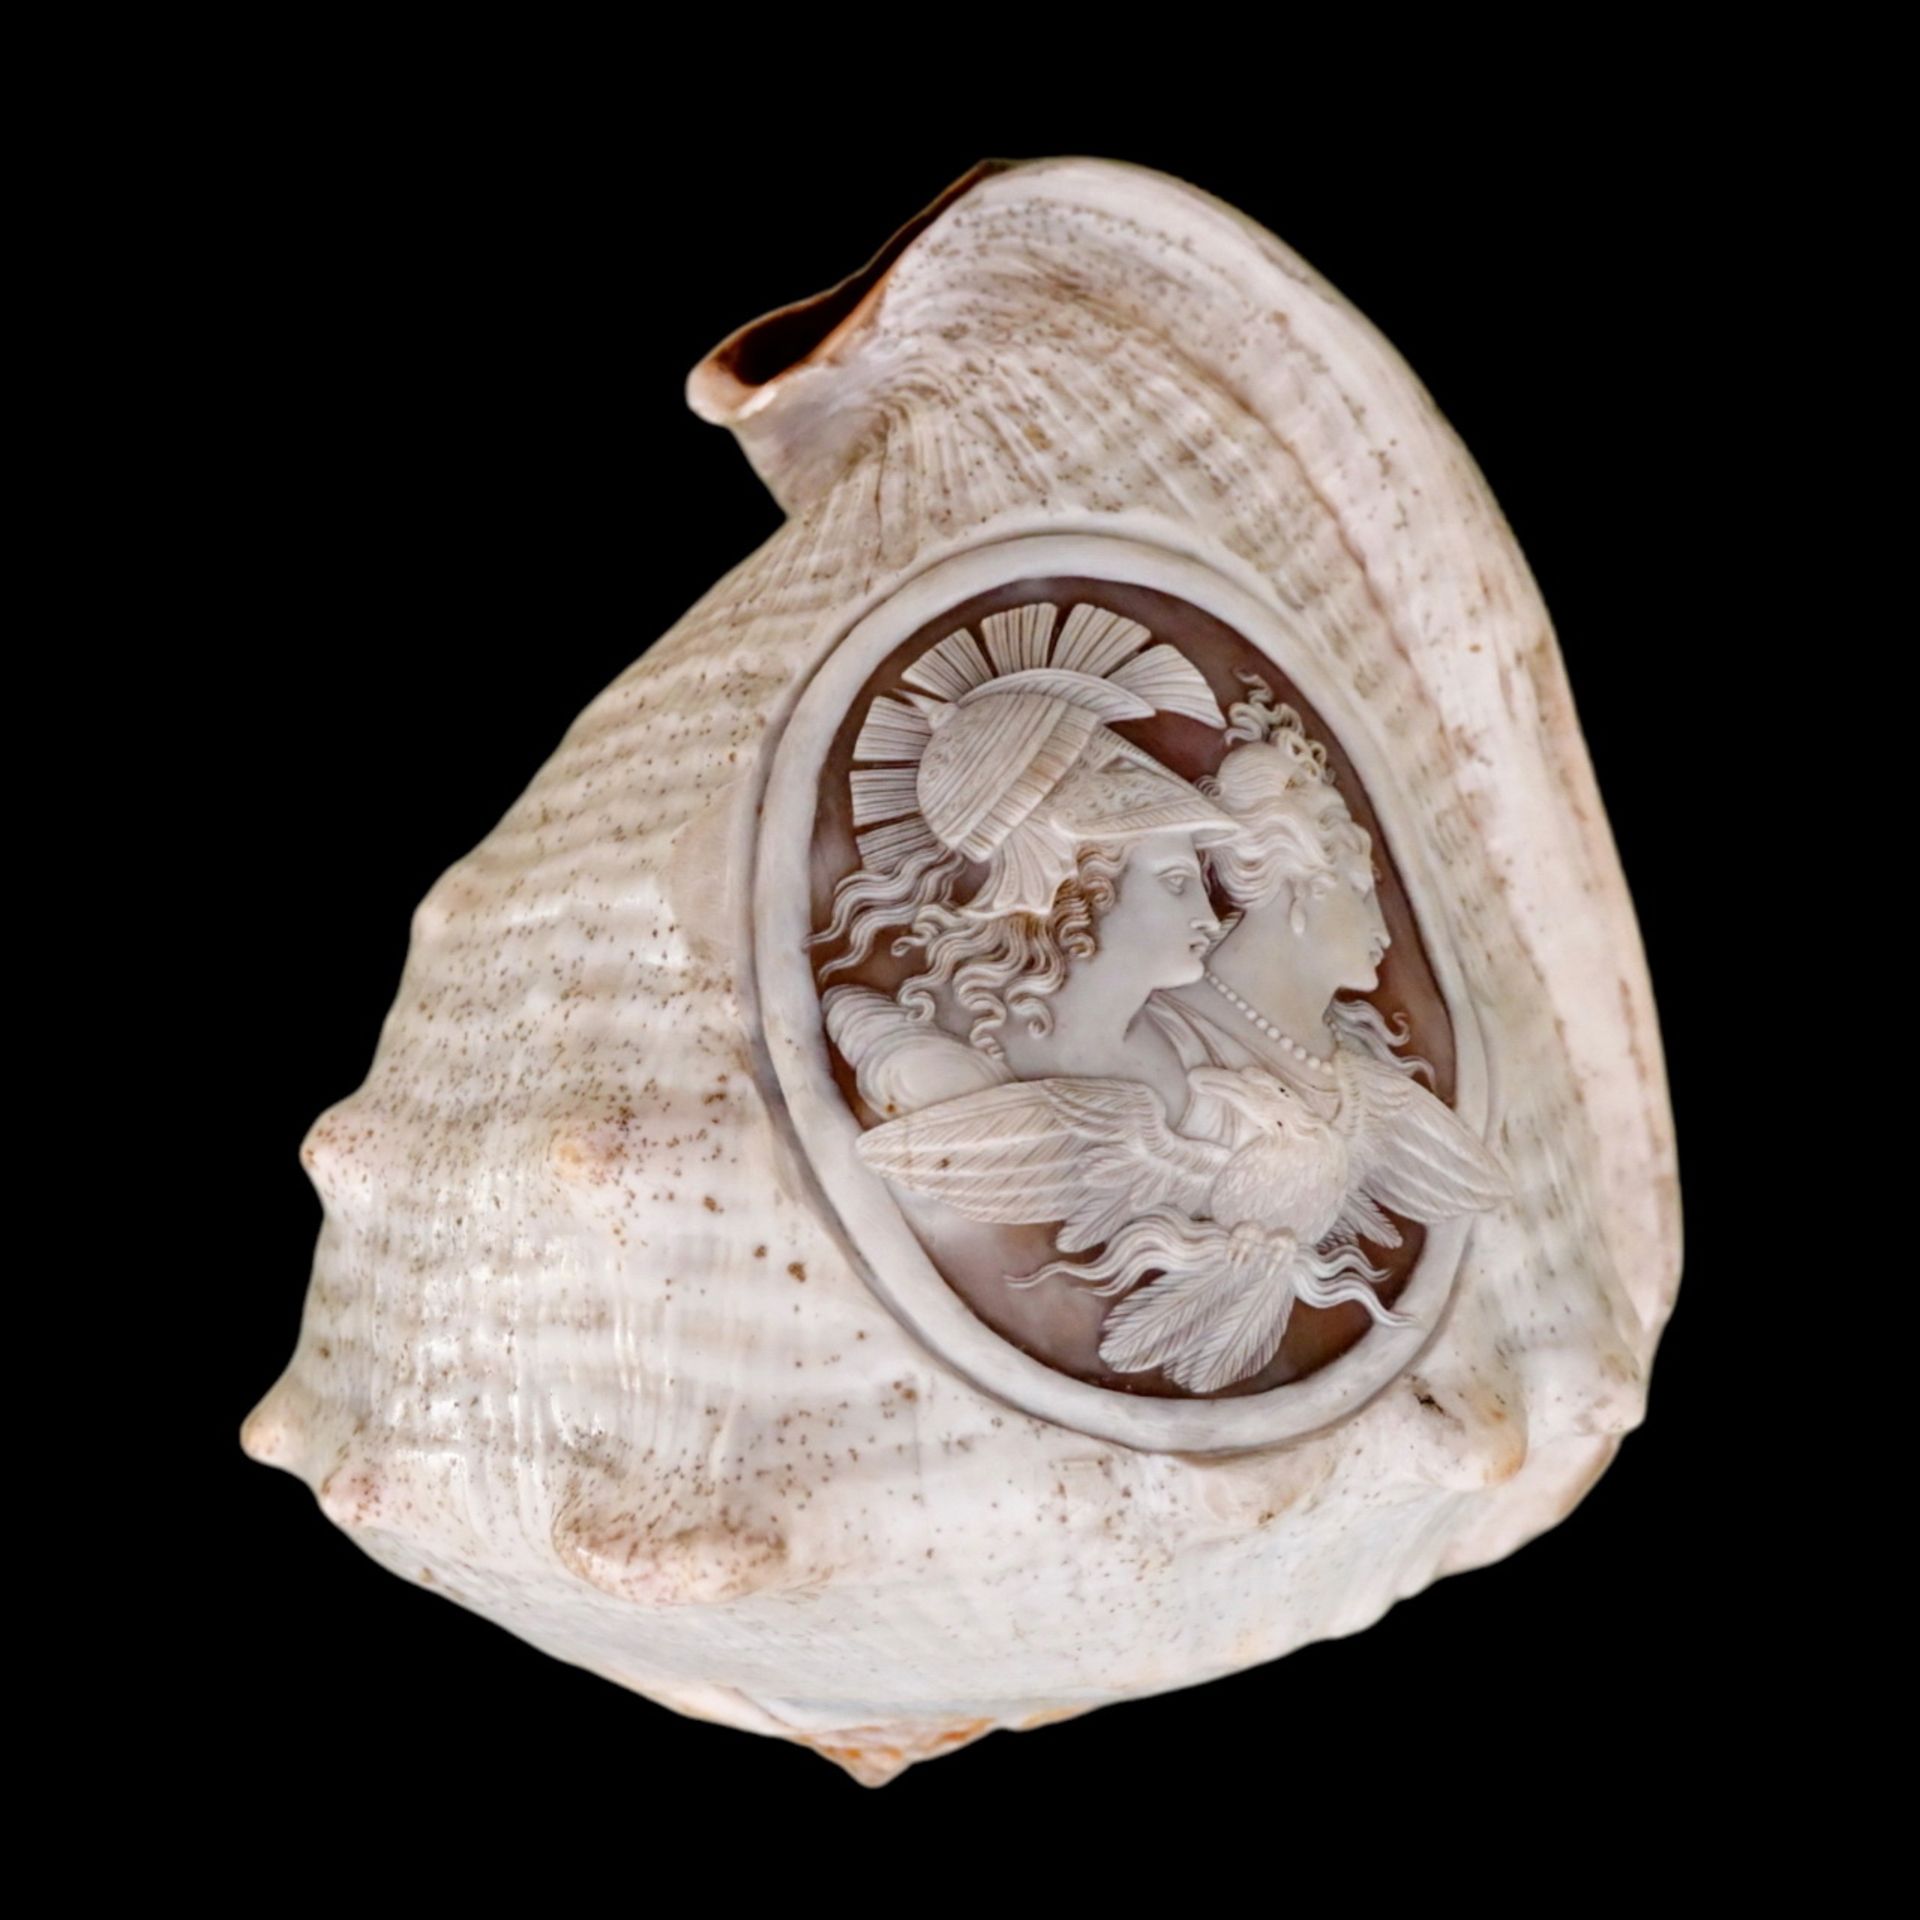 A RELIEF CARVED CAMEO CONCH SHELLA EARLY 19TH CENTURY